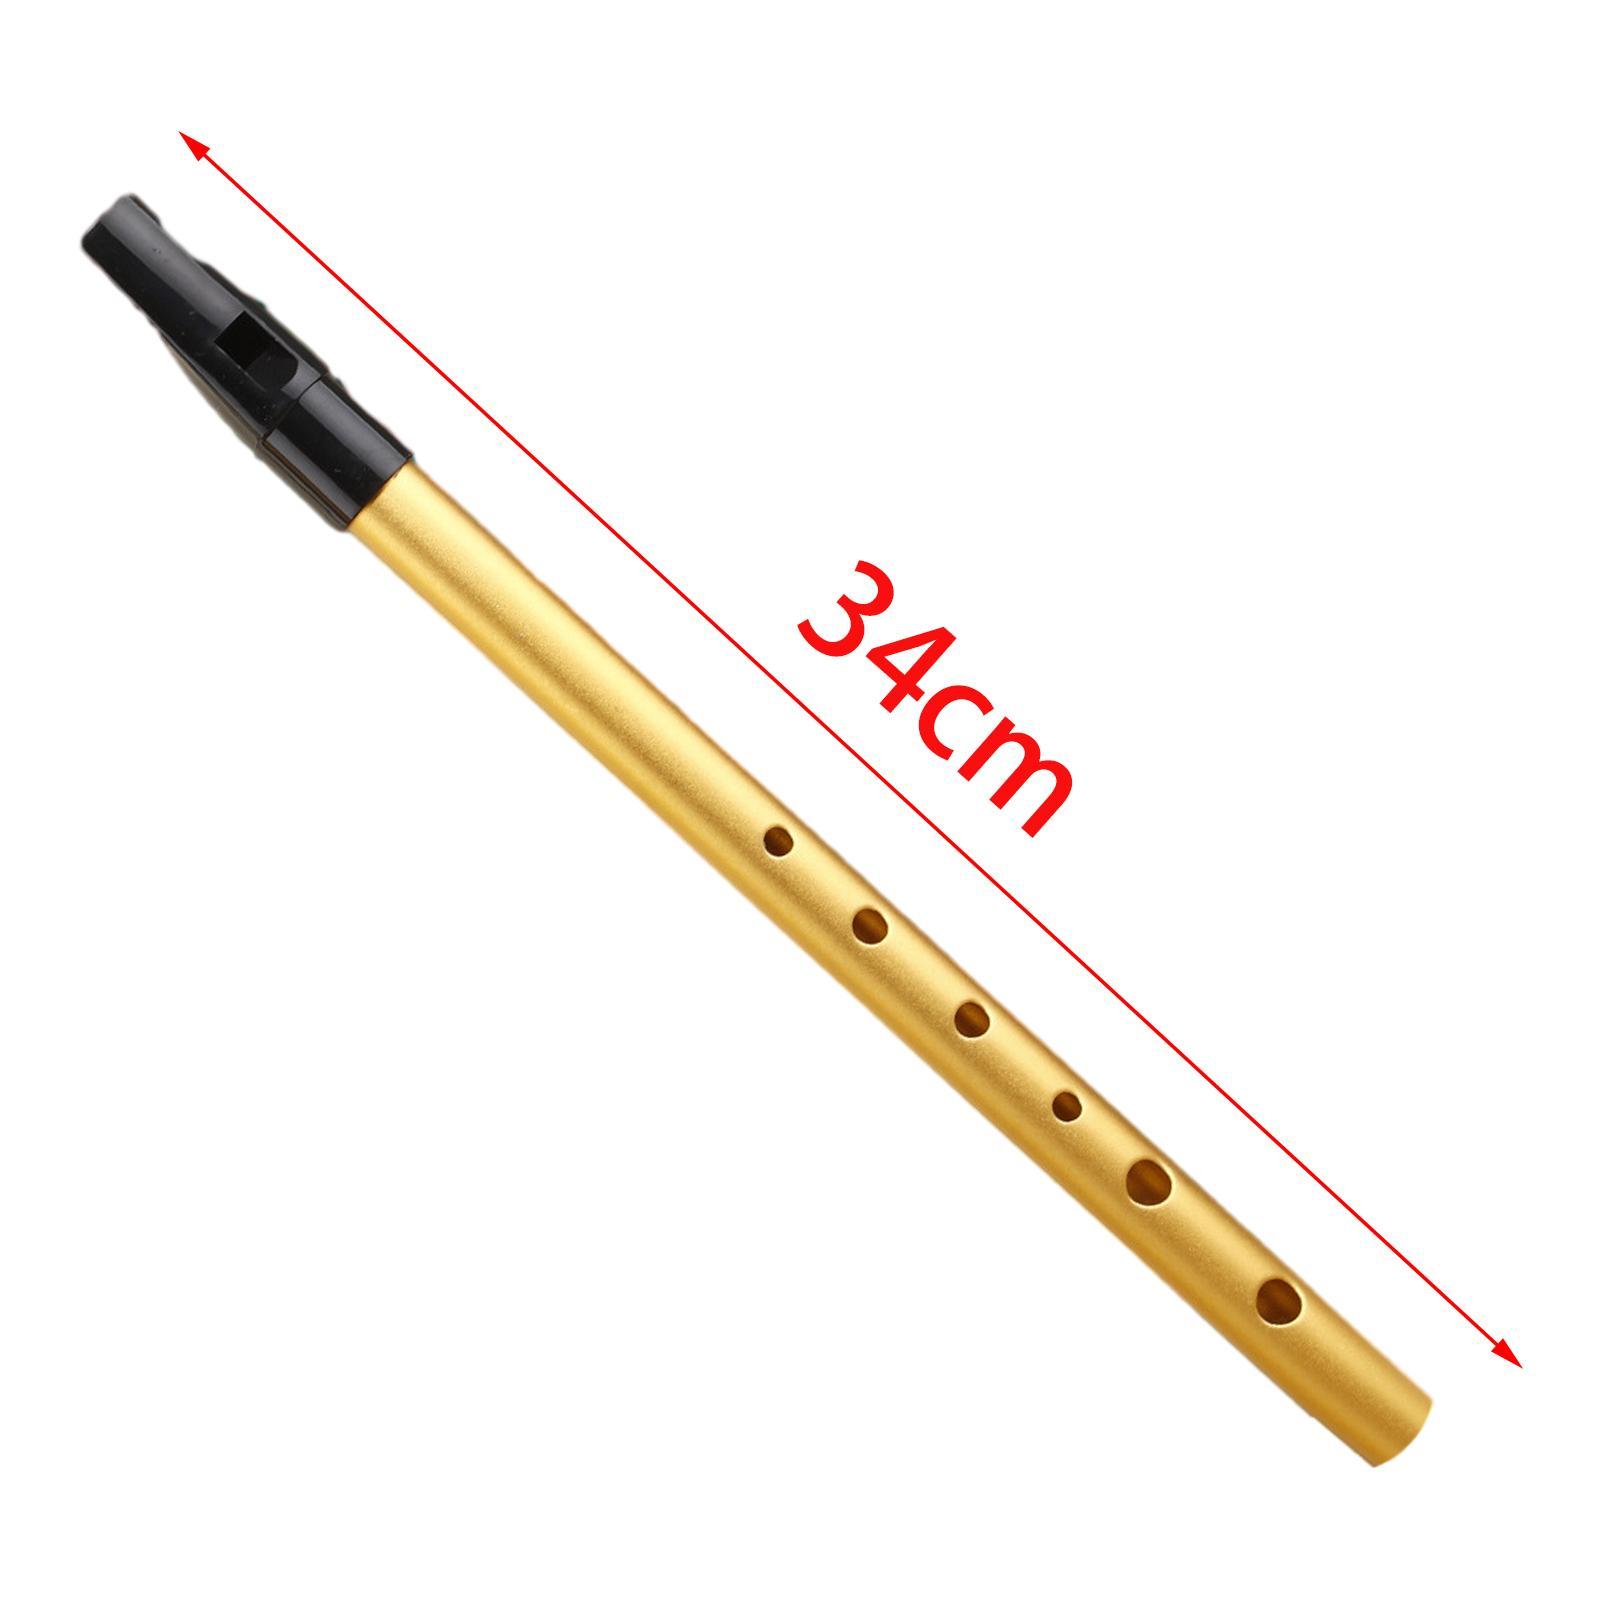 Whistle, Portable 6 Hole Piccolo Musical, Traditional Durable Flute Easy to Learn Fipple, Whistle Key of C for Kids, Beginners, Music Lovers Gift